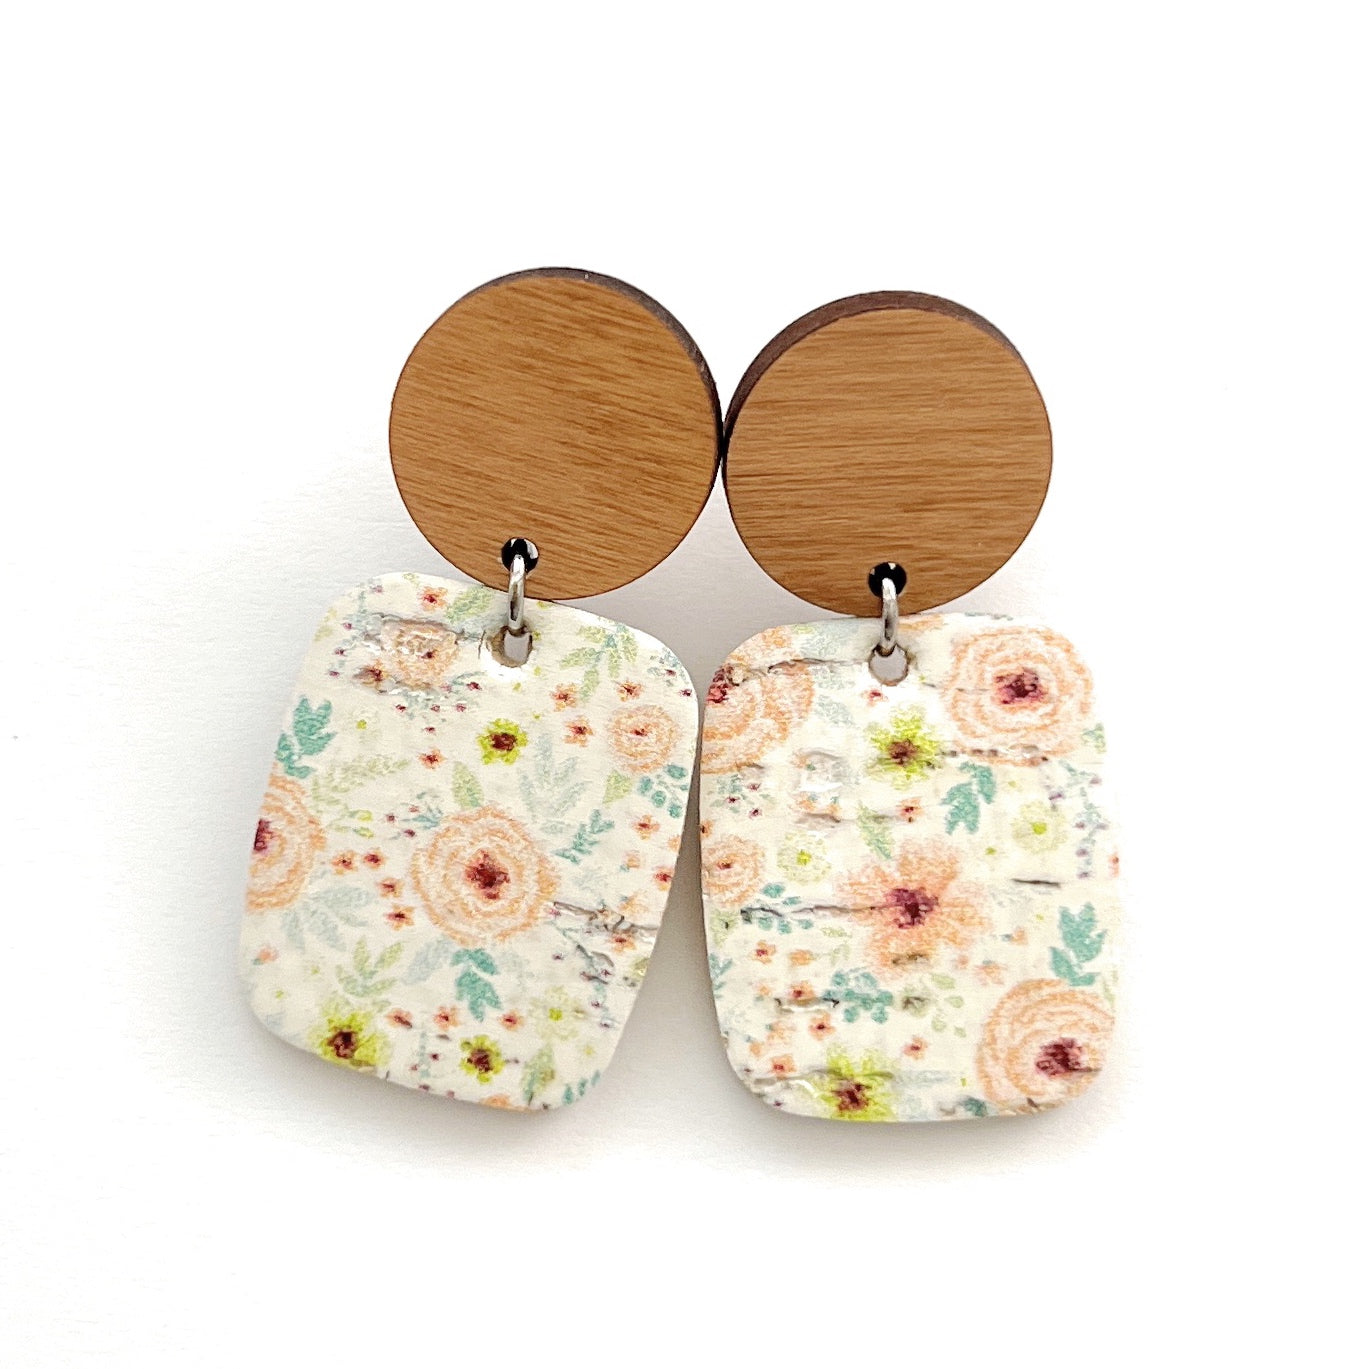 Lightweight Leather and cork Statement earring with wood. Peach blossom floral pattern